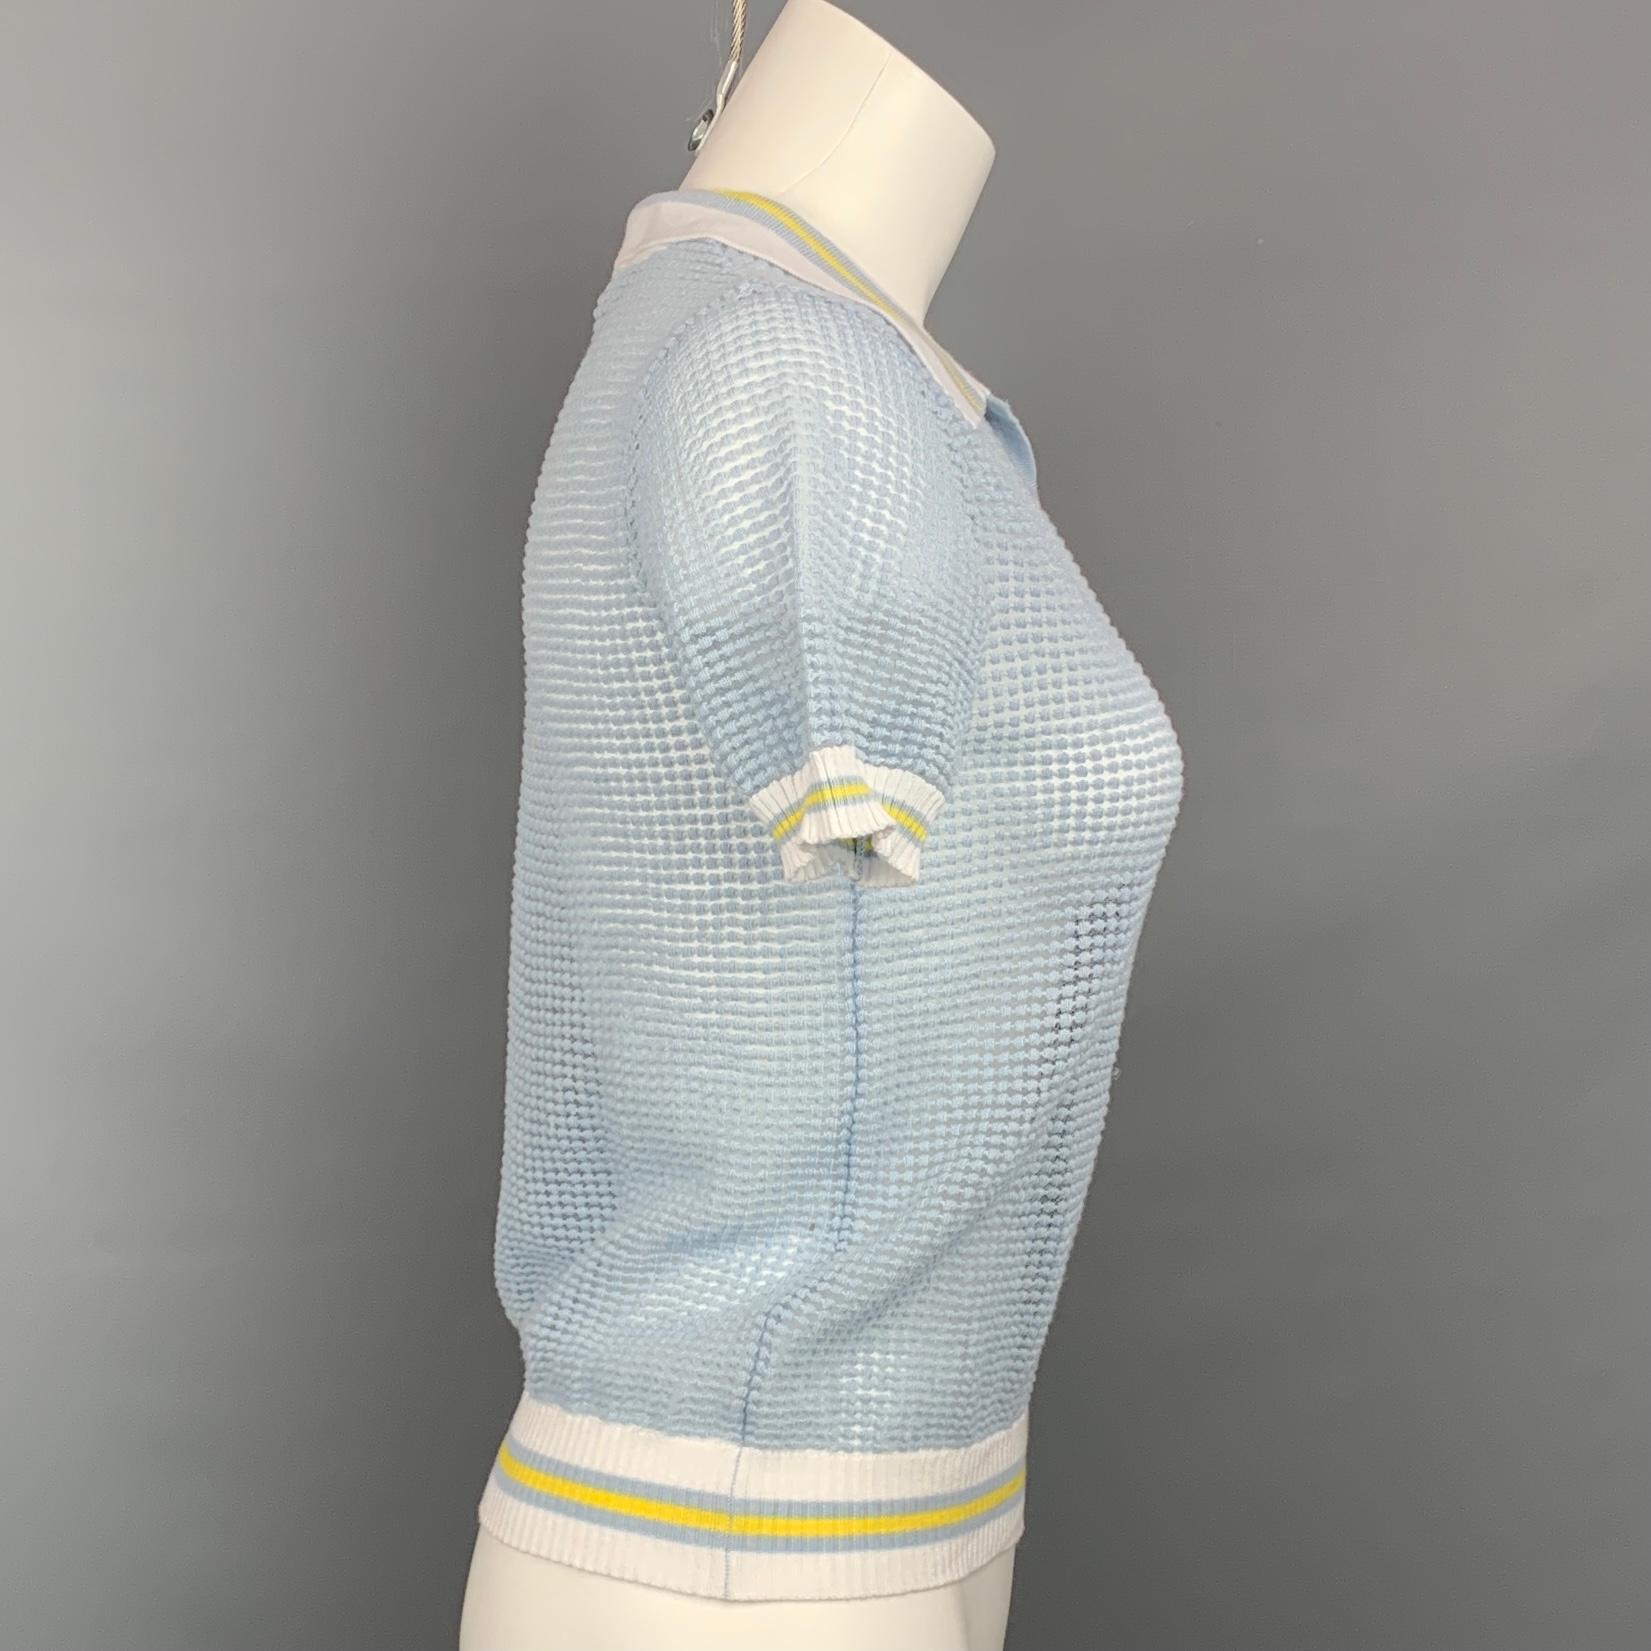 BLUMARINE polo shirt comes in a light blue & white textured material featuring a ribbed hem, spread collar, and open front. 

Very Good Pre-Owned Condition.
Marked: I 38 / D 32

Measurements:

Shoulder: 13 in.
Bust: 34 in.
Sleeve: 9 in.
Length: 20.5